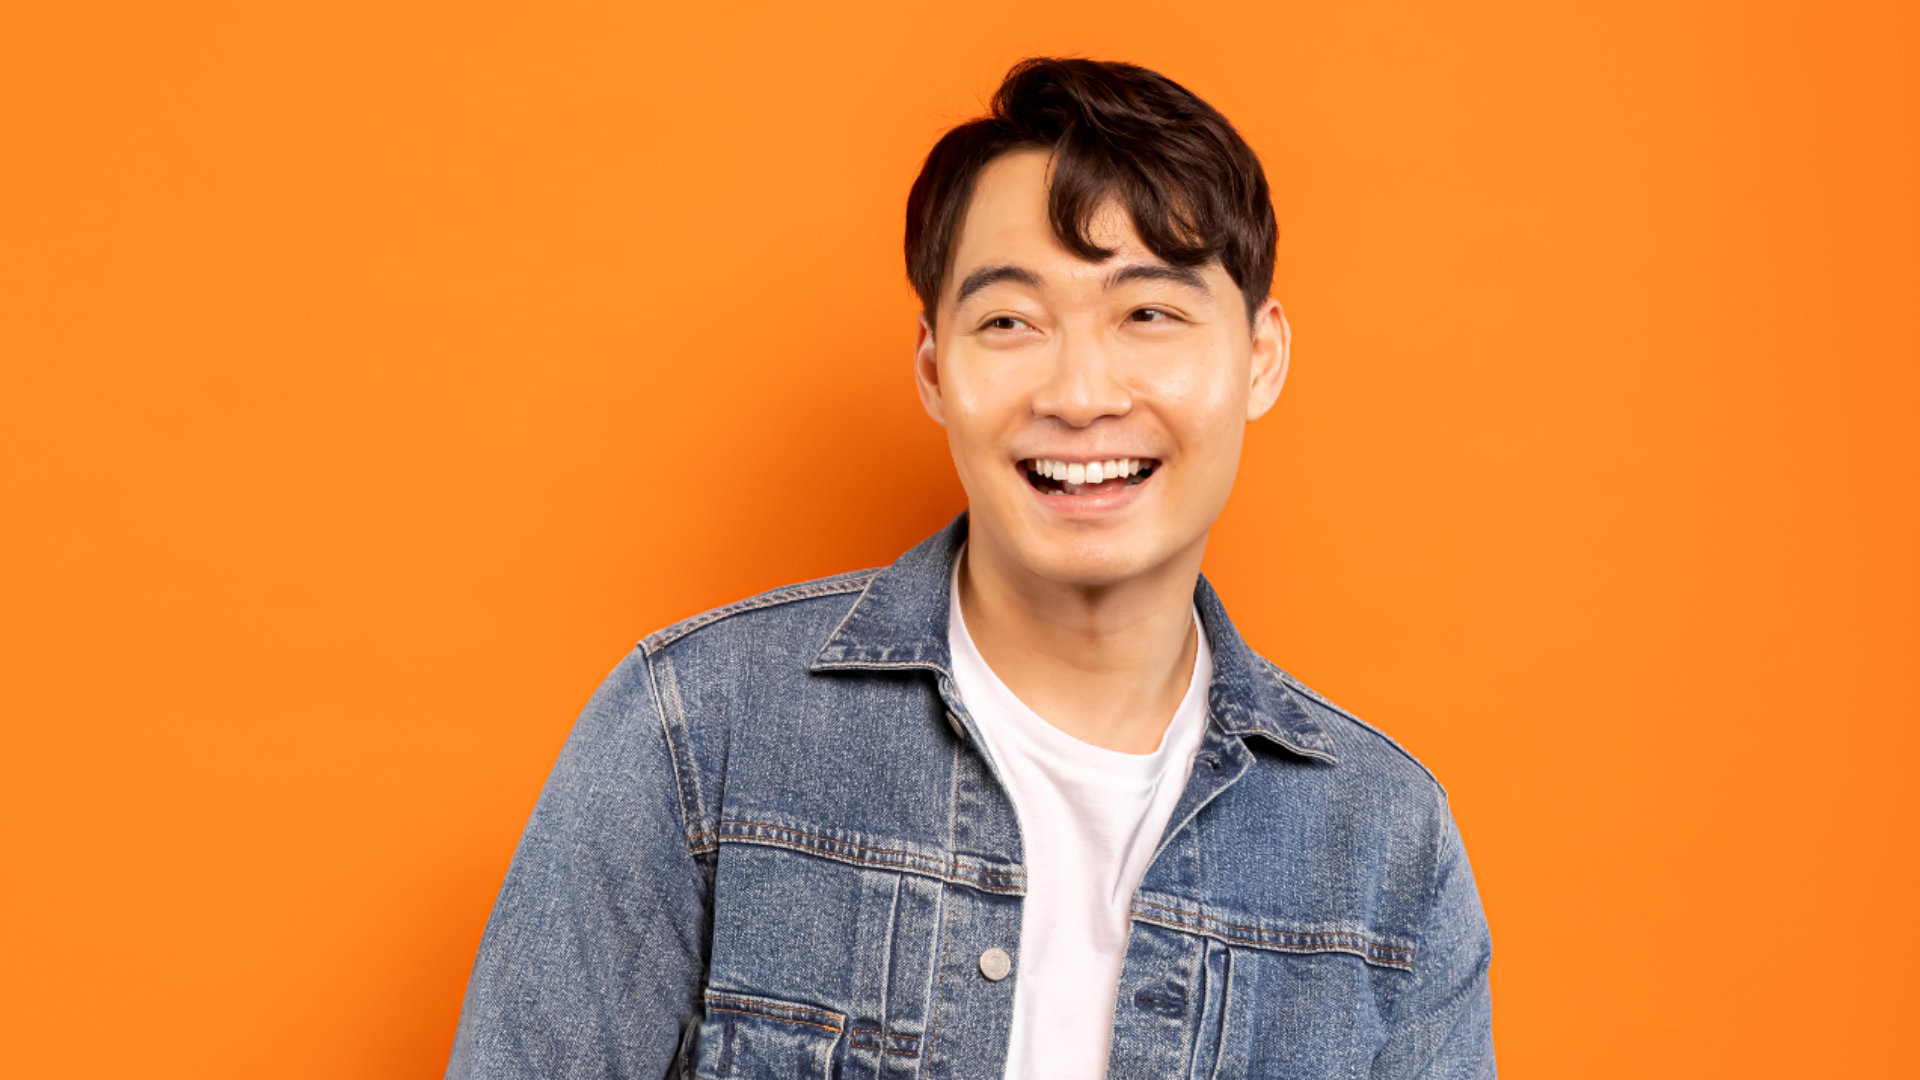 Comedian Nigel Ng announces UK tour dates for The Haiyaa World Tour